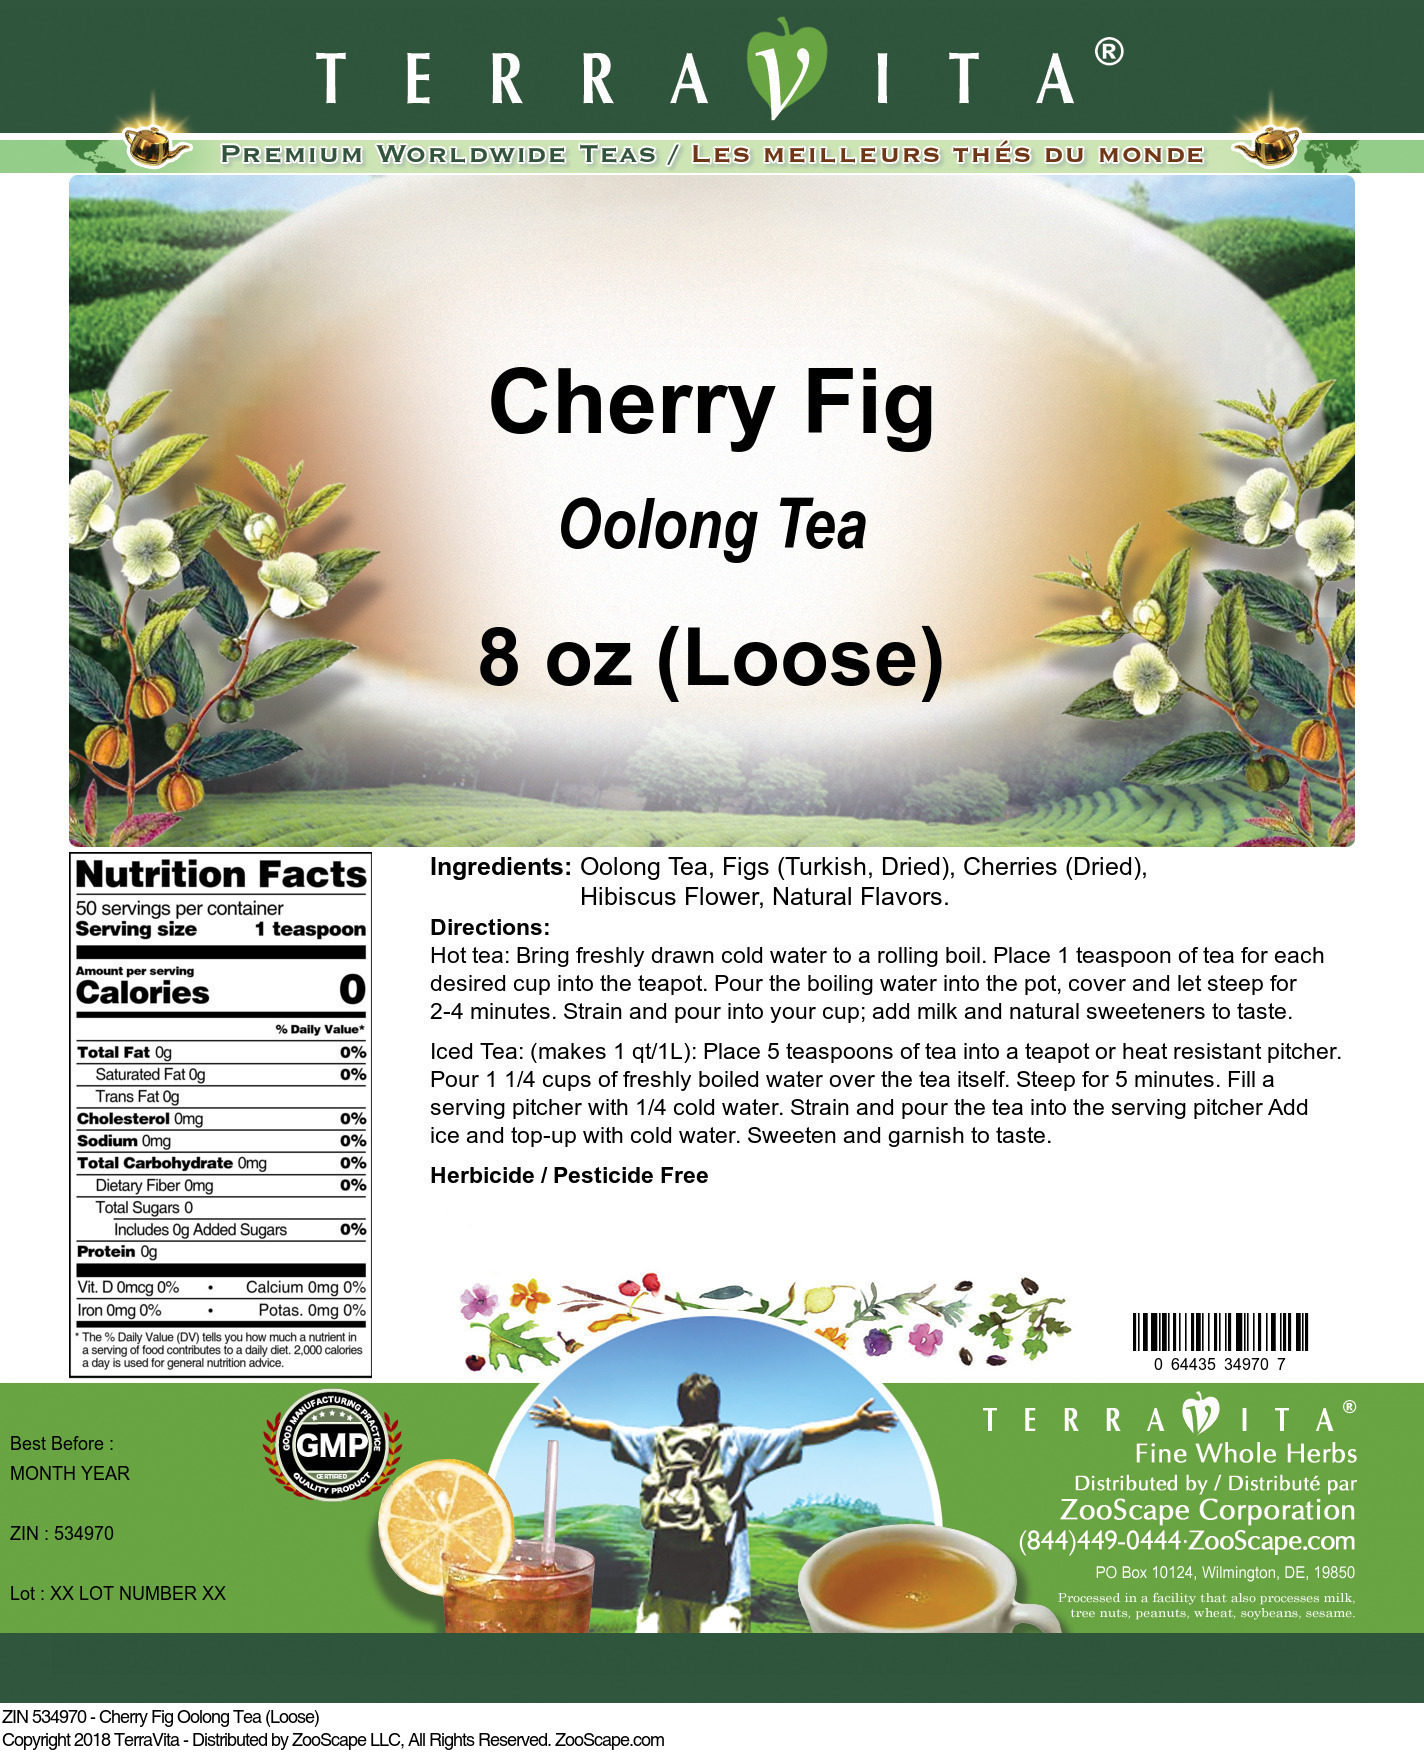 Cherry Fig Oolong Tea (Loose) - Label